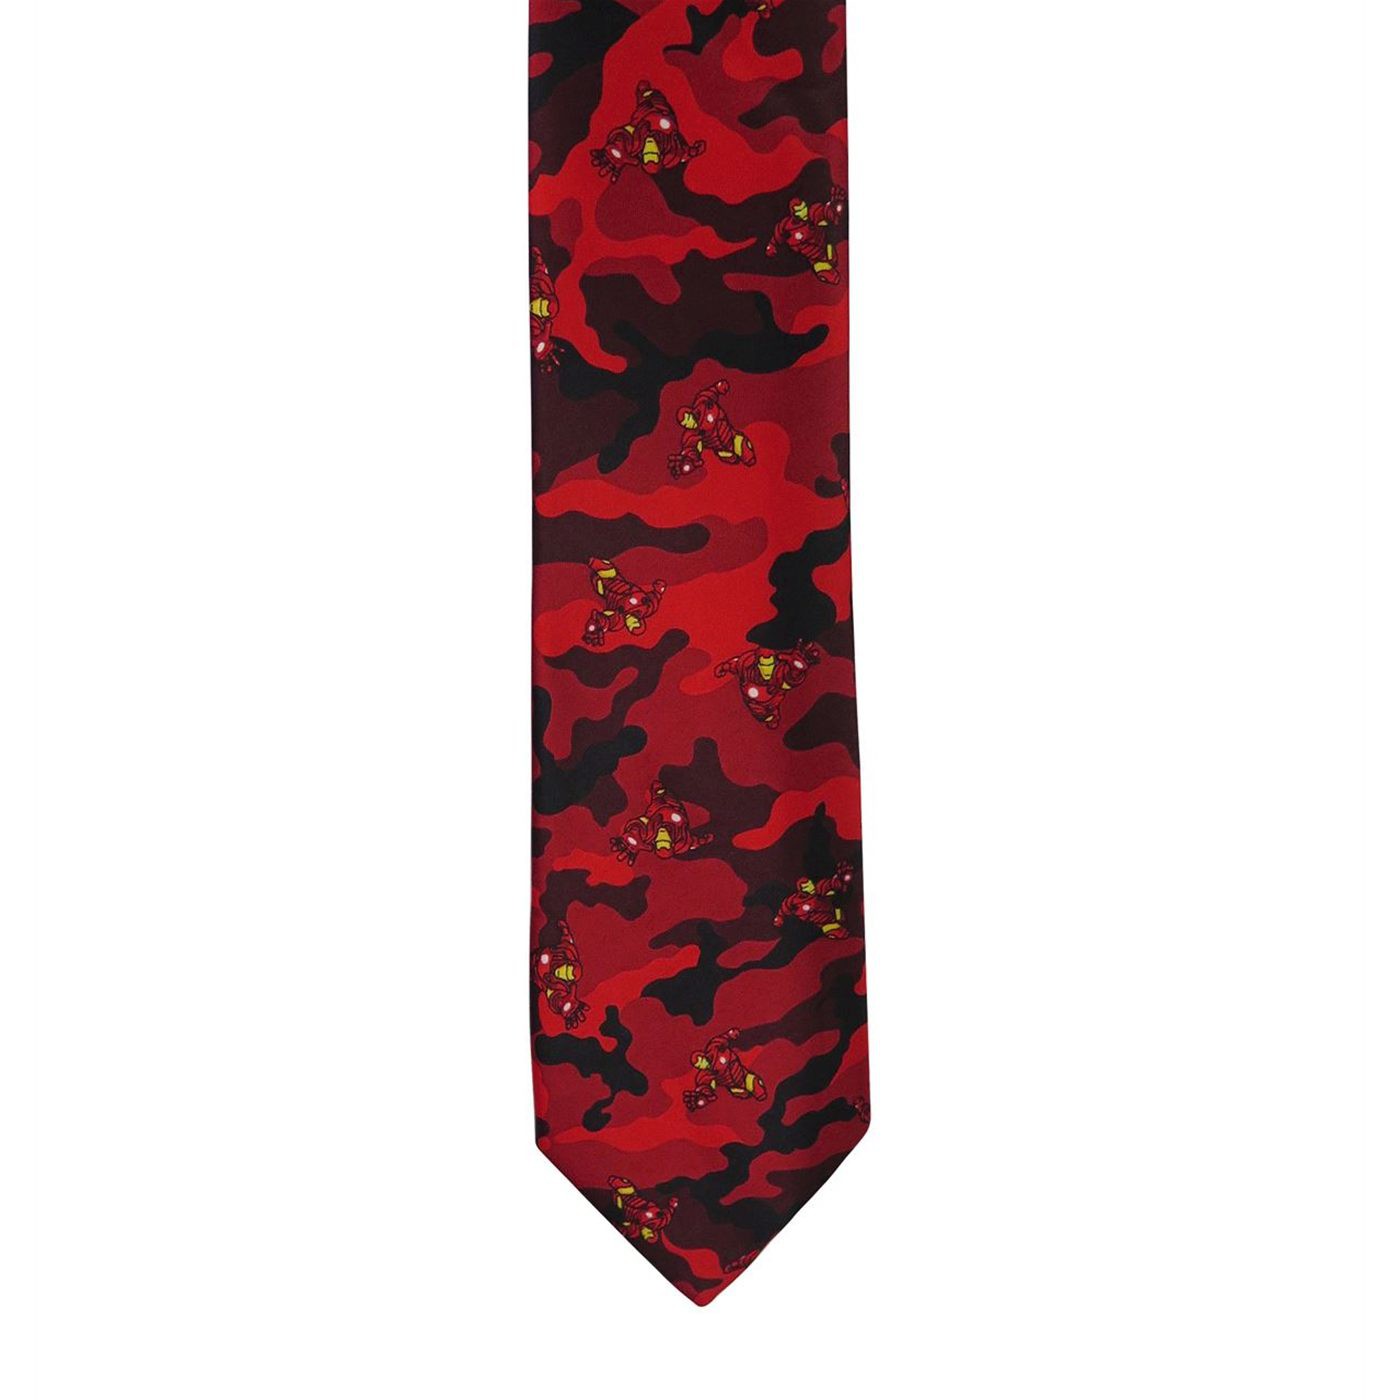 Iron Man Flying Red and Black Camo Tie